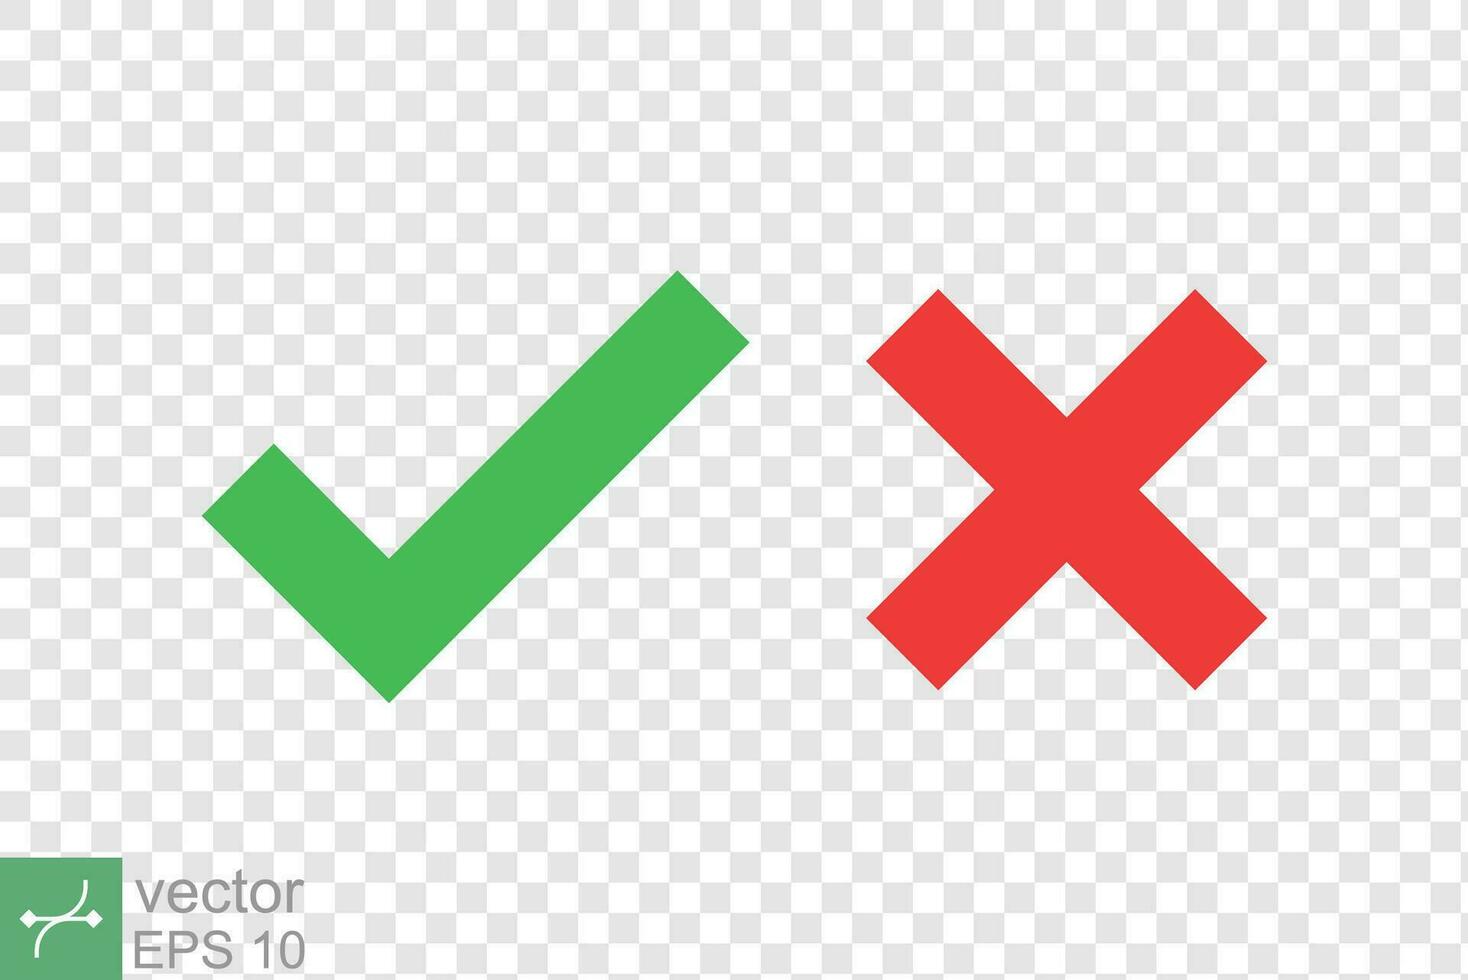 Checkmark cross icon. Simple flat style. Red x, green tick, check mark, right and wrong concept. Vector illustration isolated on editable background. EPS 10.